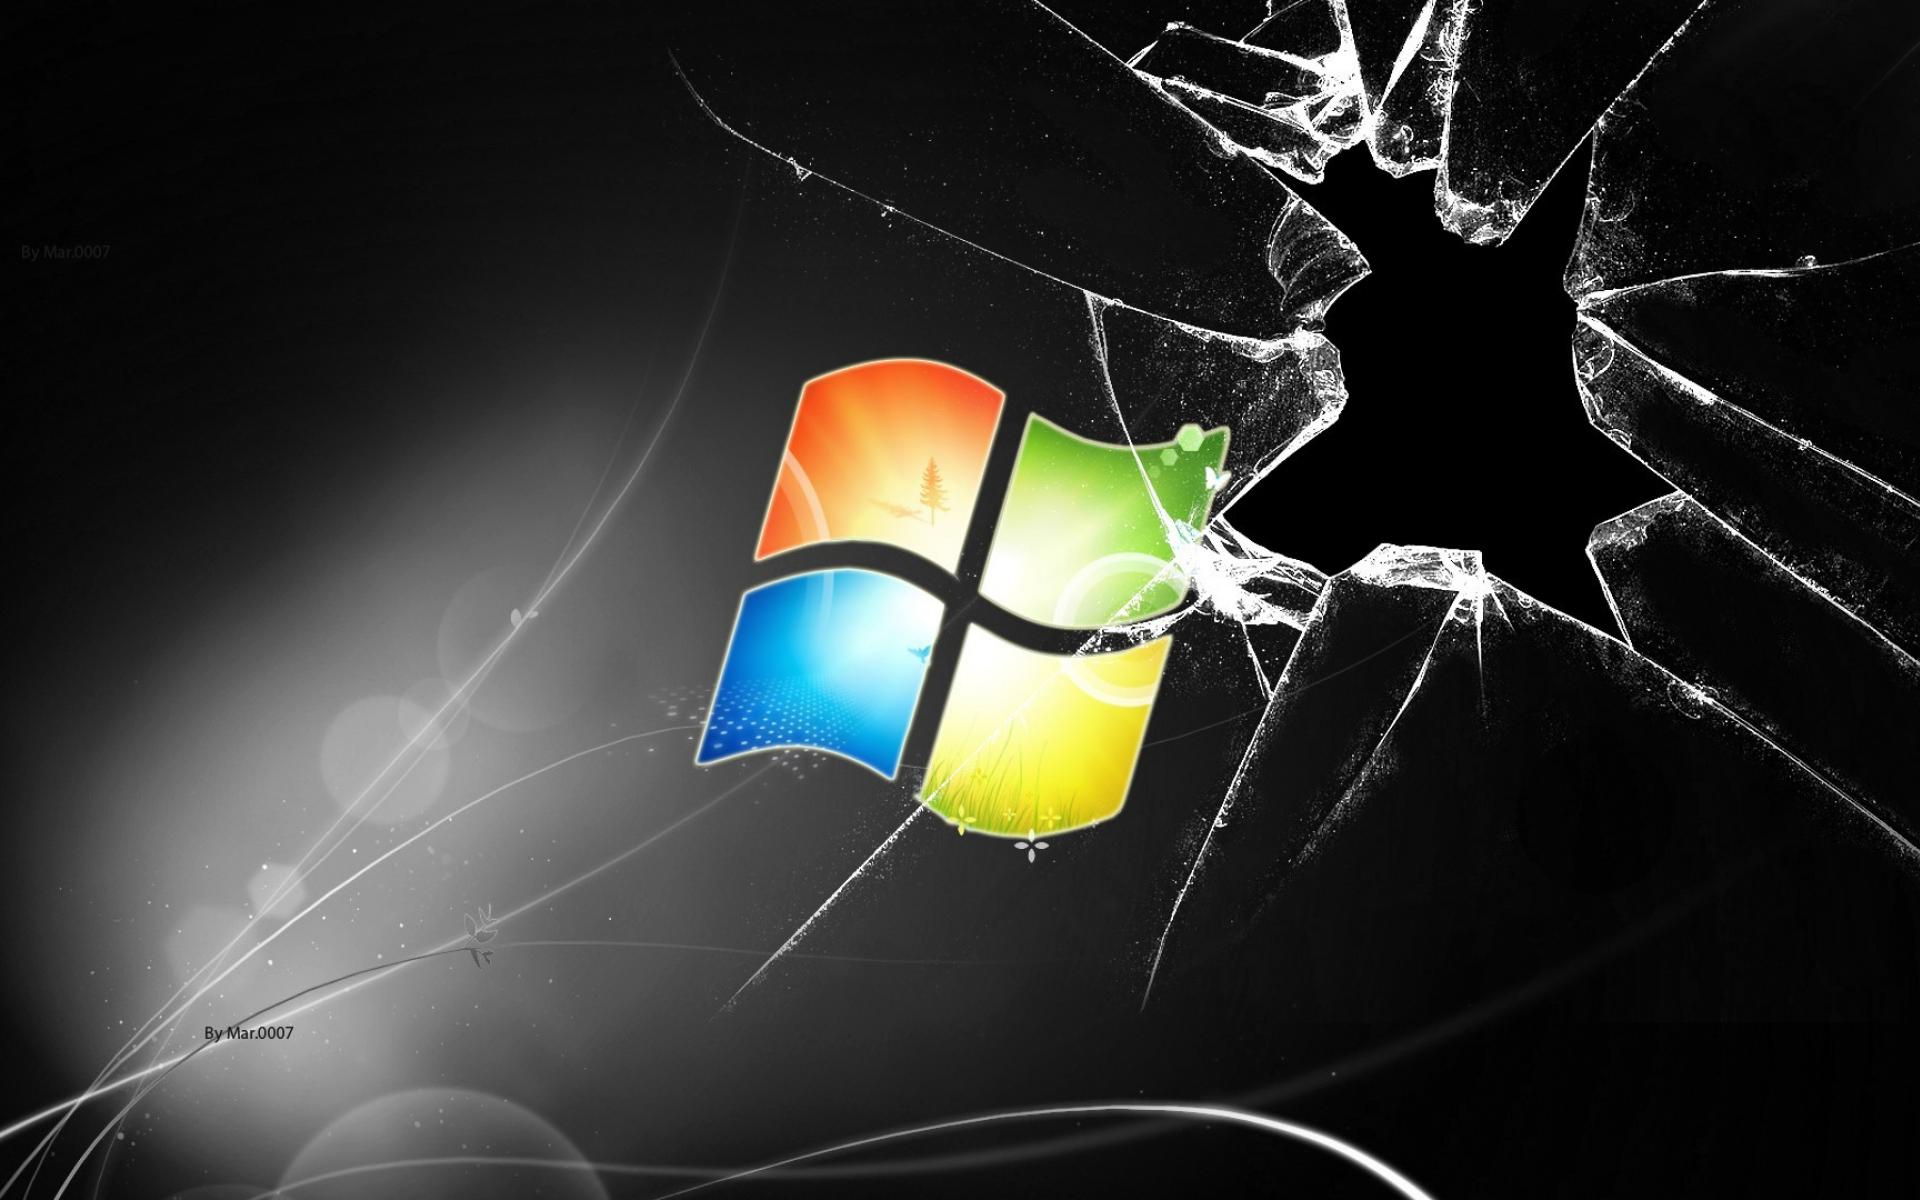 cracked screen wallpaper,design,graphic design,technology,graphics,operating system